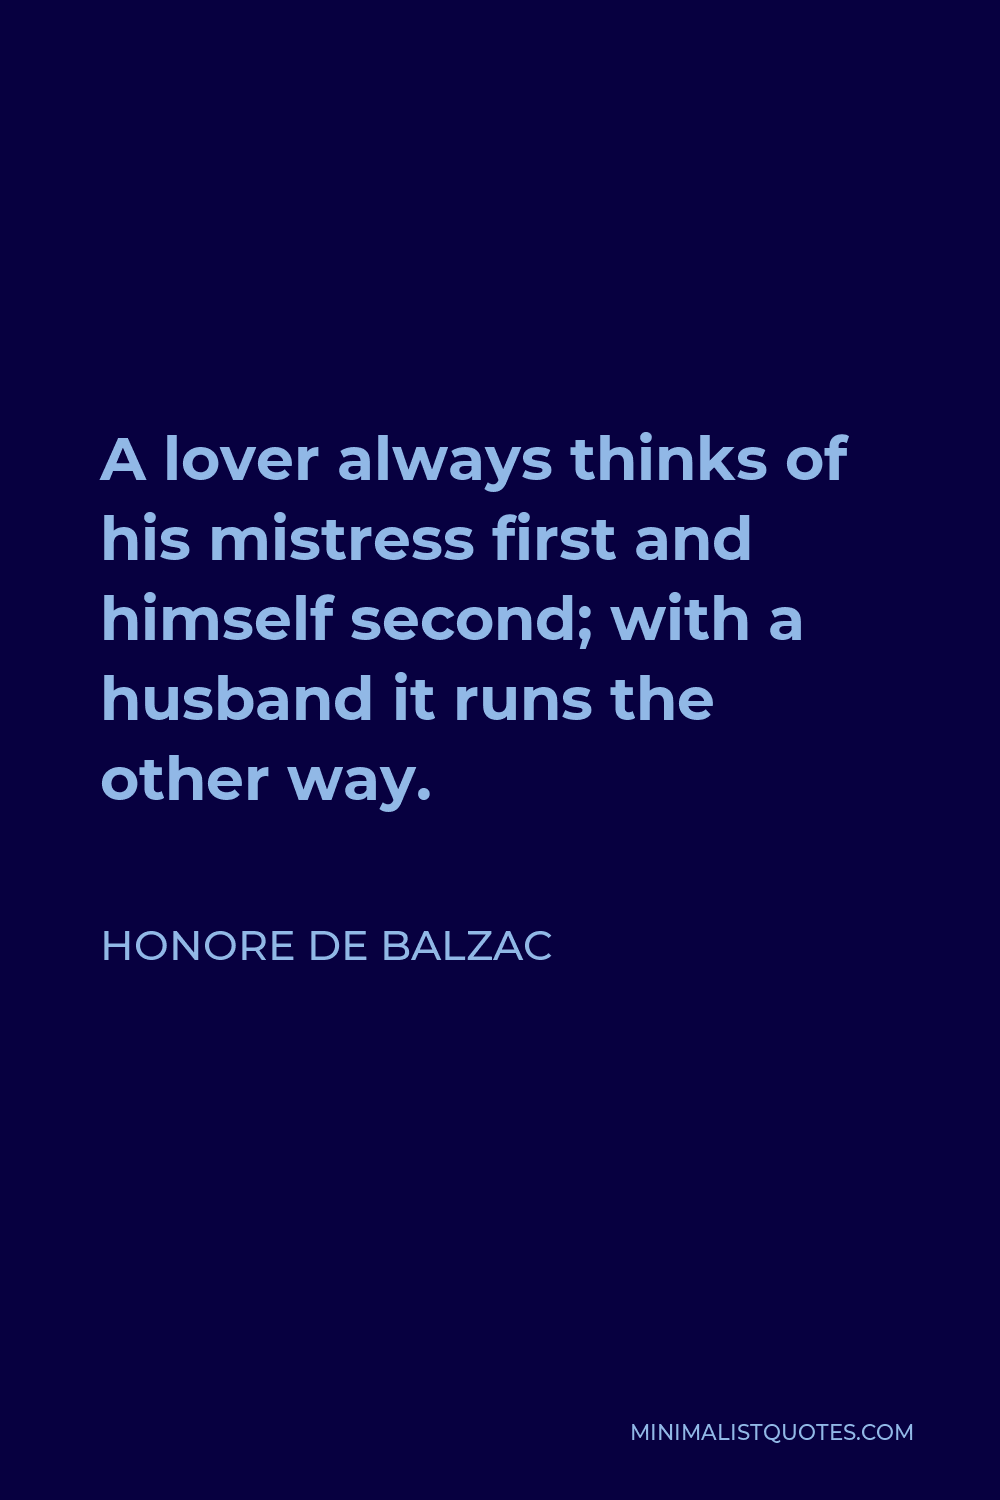 Honore de Balzac Quote - A lover always thinks of his mistress first and himself second; with a husband it runs the other way.